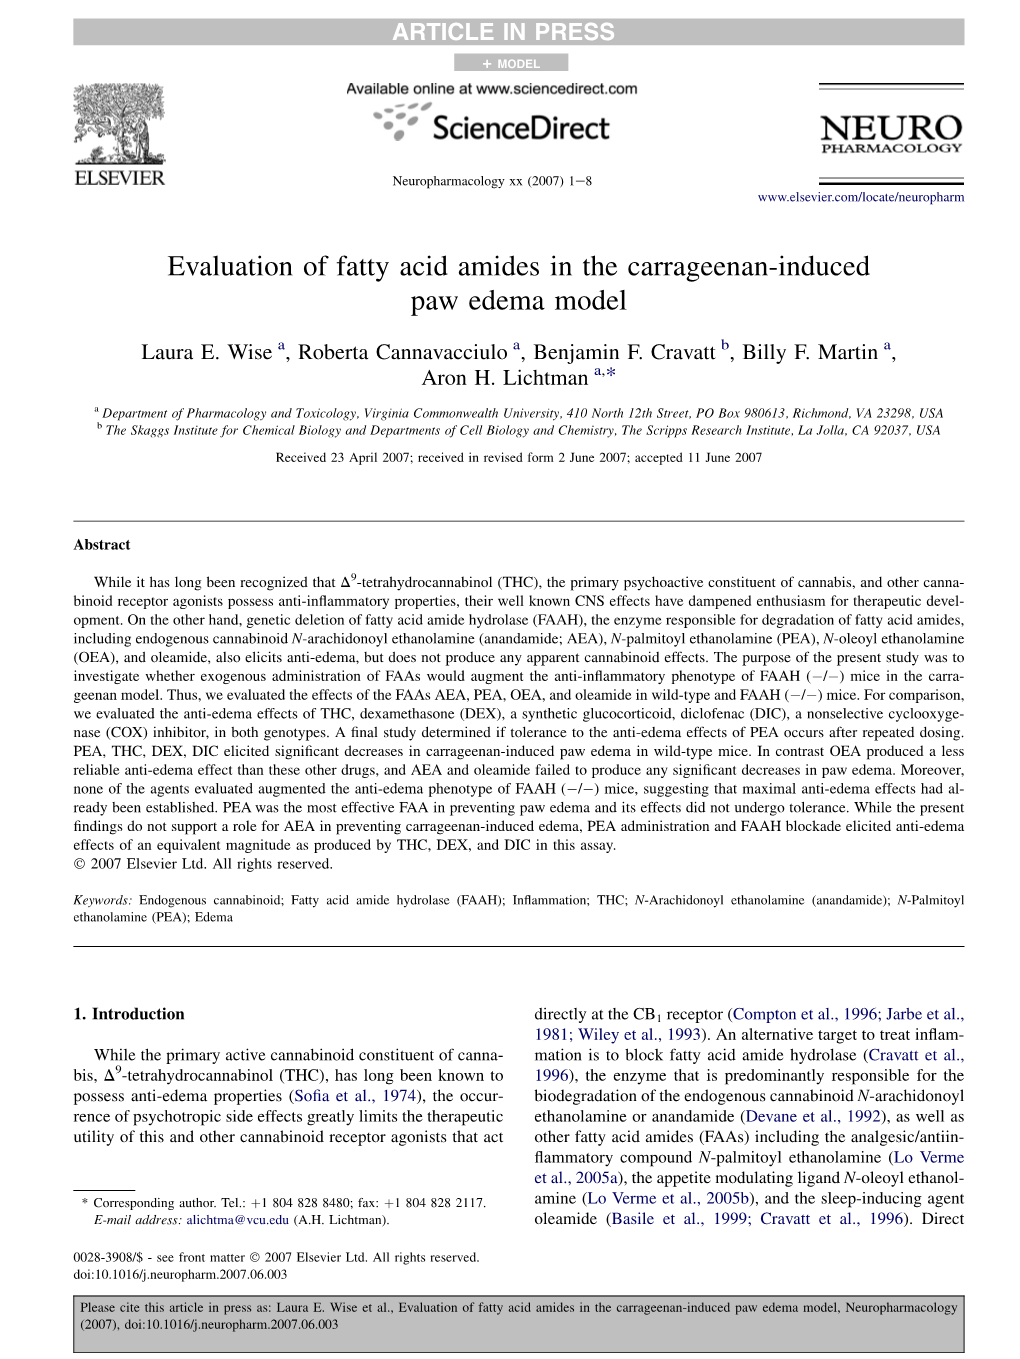 Evaluation of Fatty Acid Amides in the Carrageenan-Induced Paw Edema Model